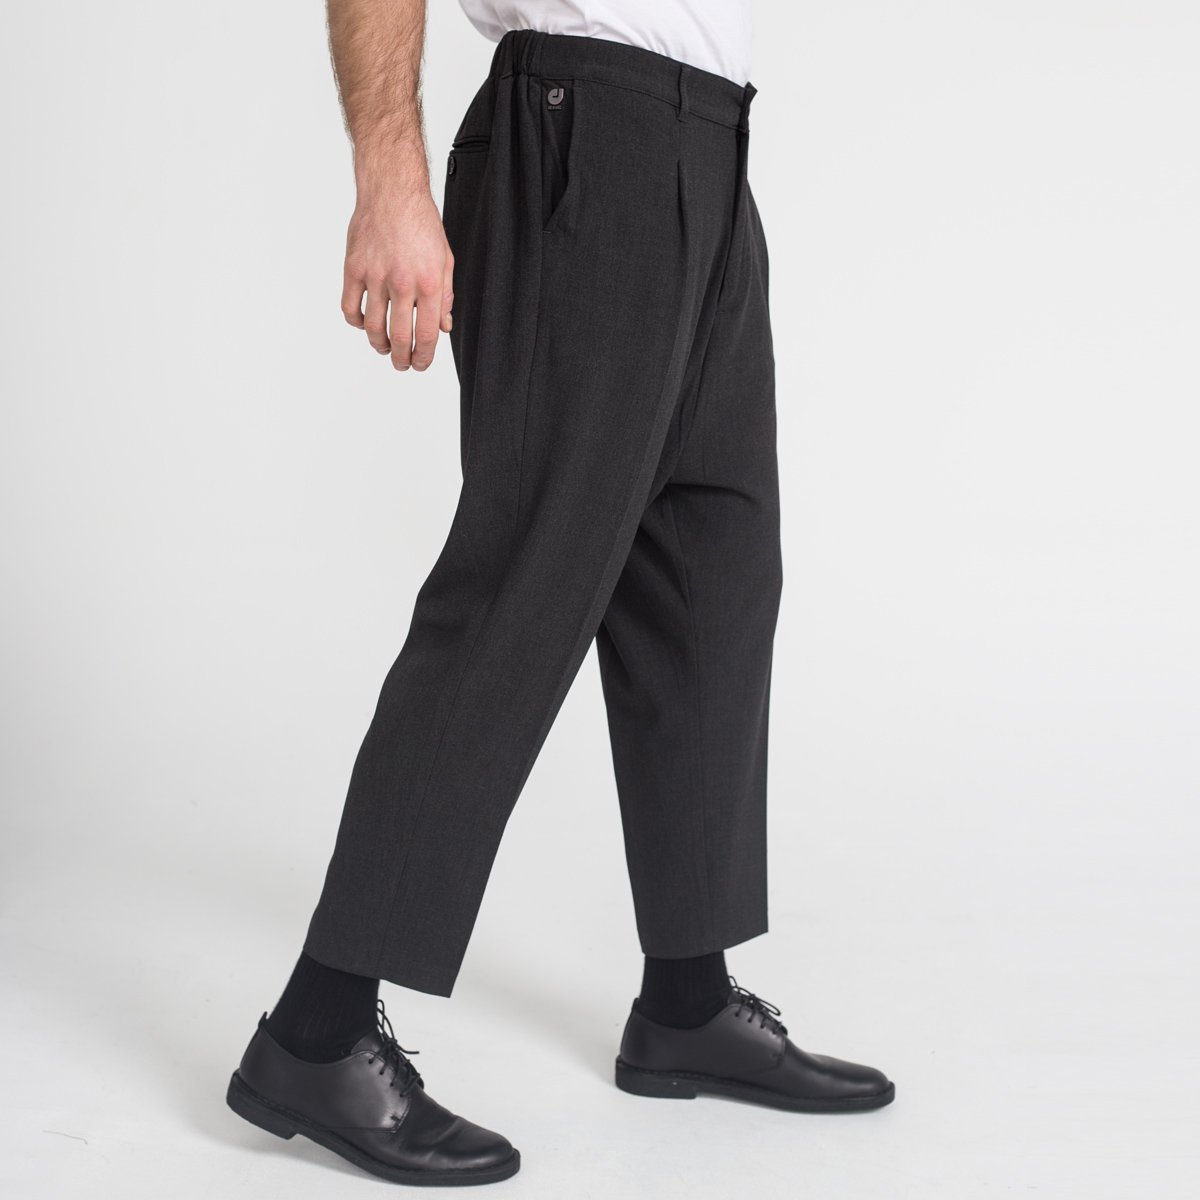 Sarouel Pince Wool Noir Chiné - DCjeans saroual and clothing